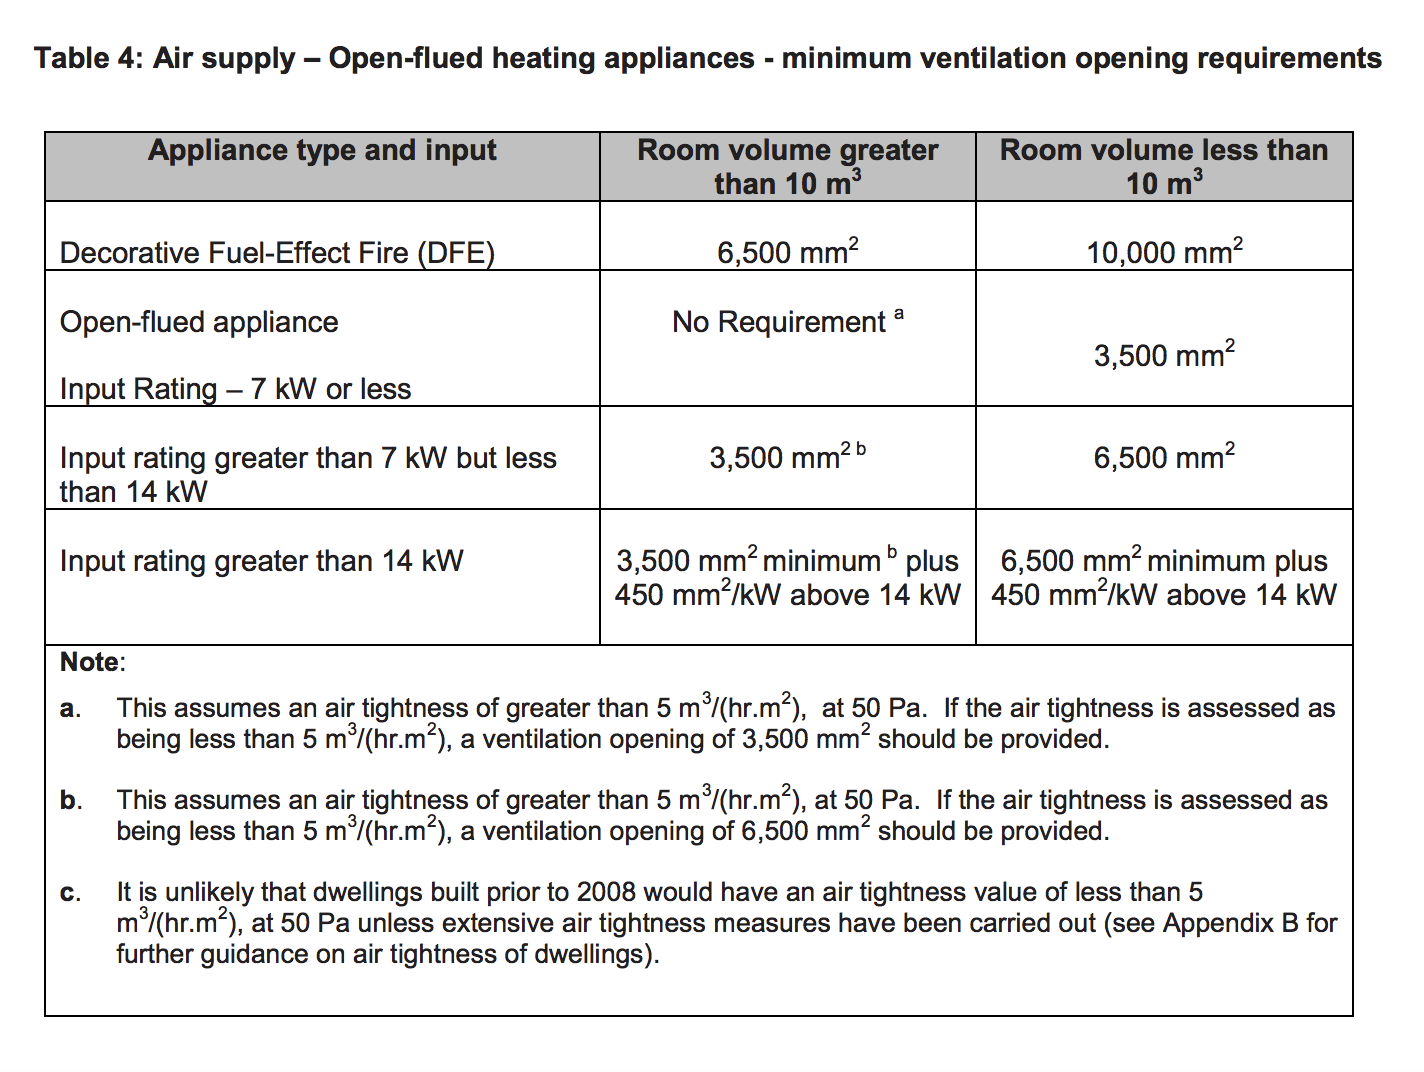 Table HJ4 - Air supply - Open-flued heating appliances - minimum ventilation opening requirements - Extract from TGD J